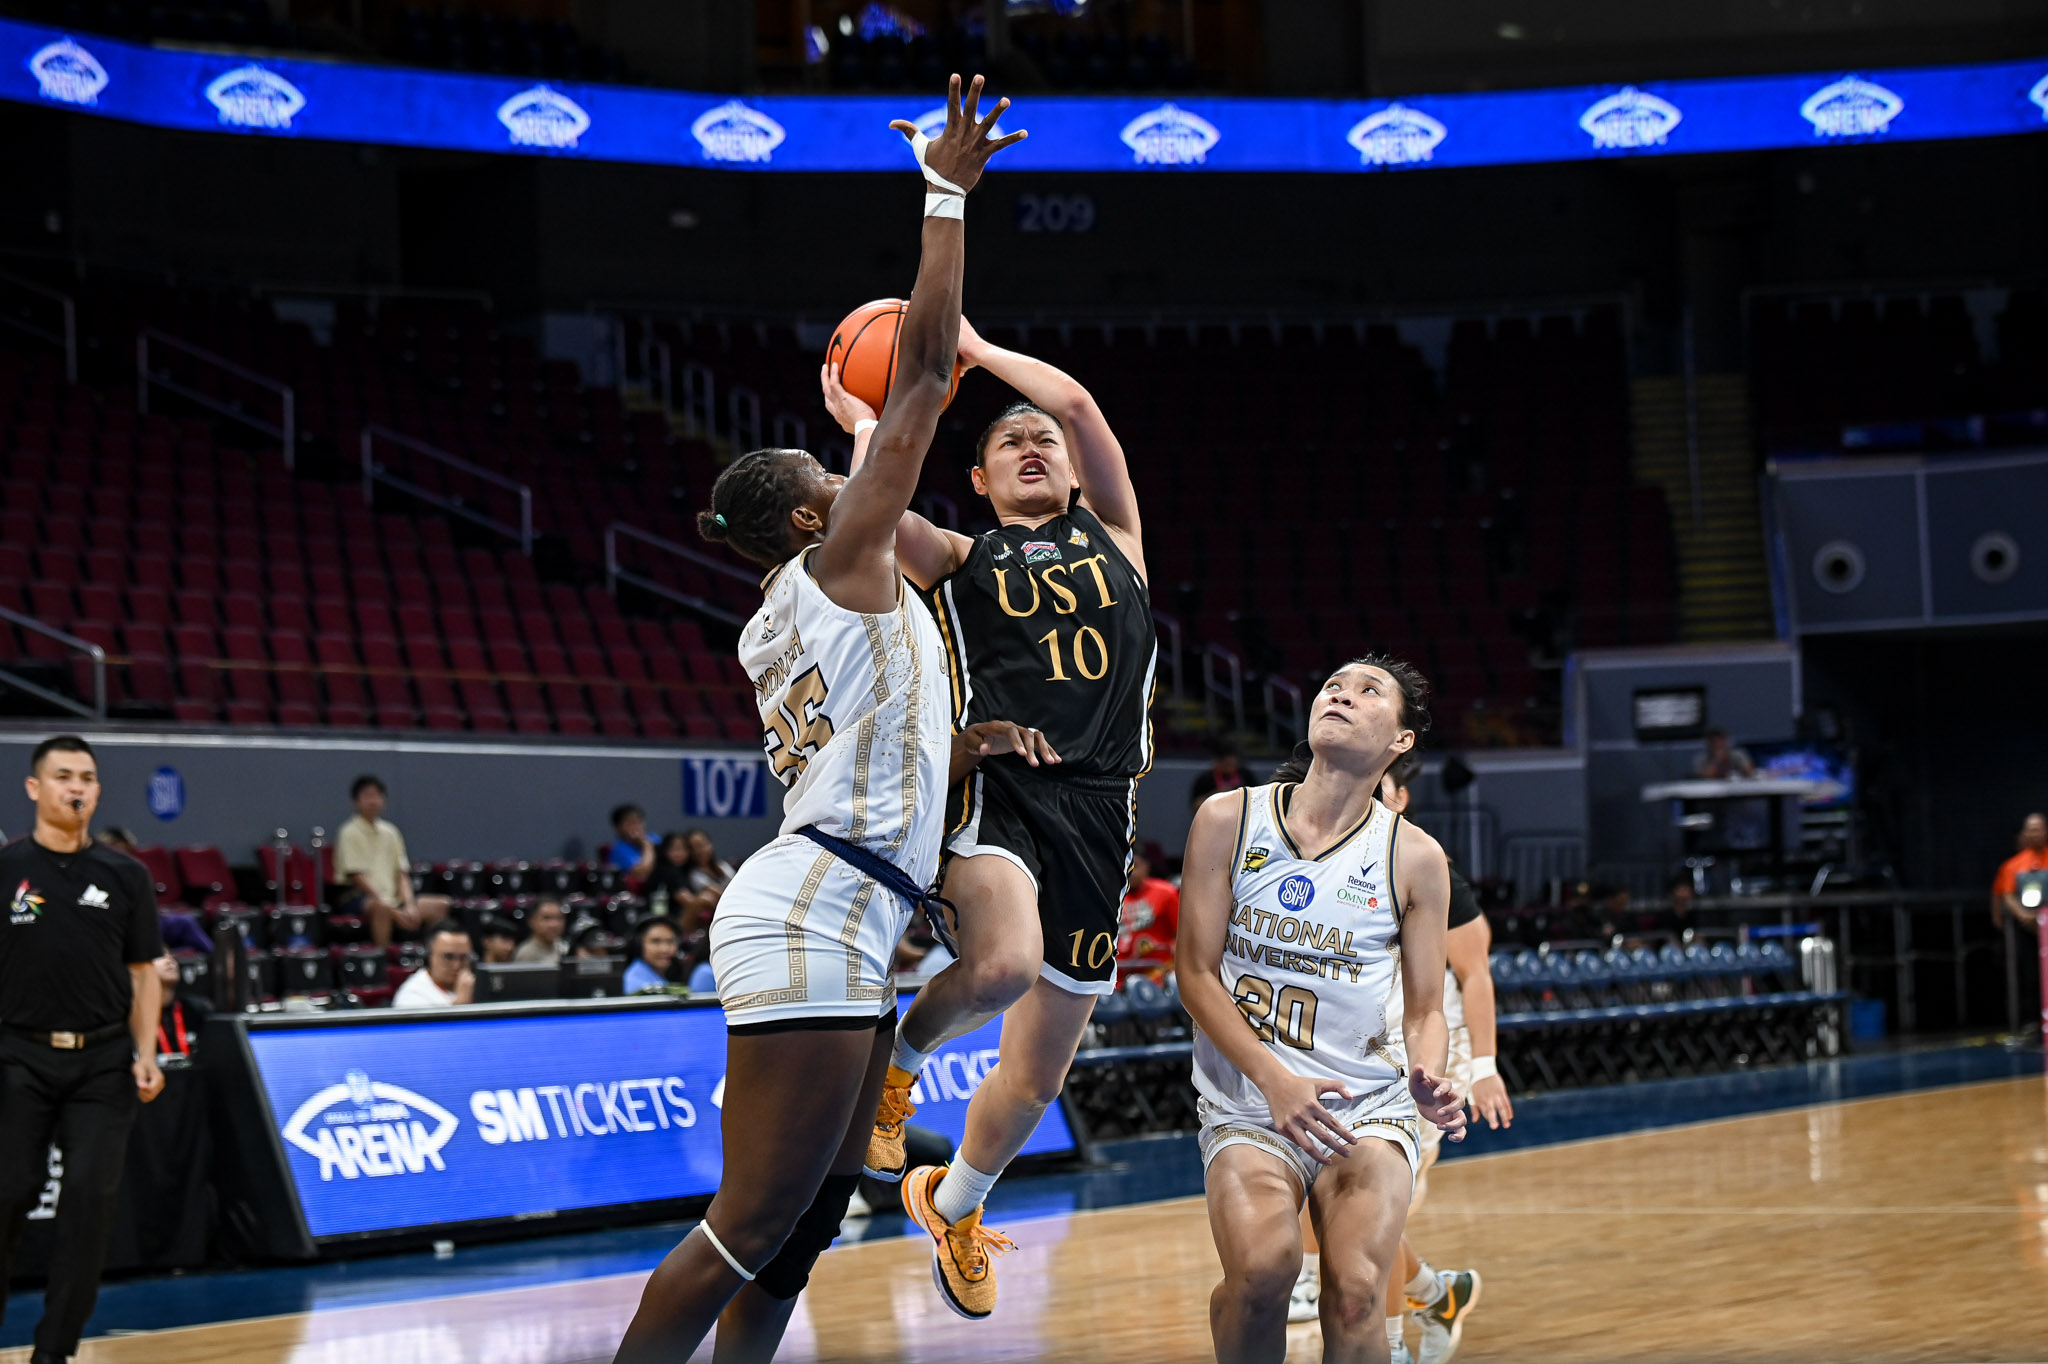 UAAP86-WBB-NU-vs-UST-REYNALYN-FERRER-6626 UST moves to verge of toppling NU's UAAP women's basketball dynasty Basketball News UAAP UST  - philippine sports news